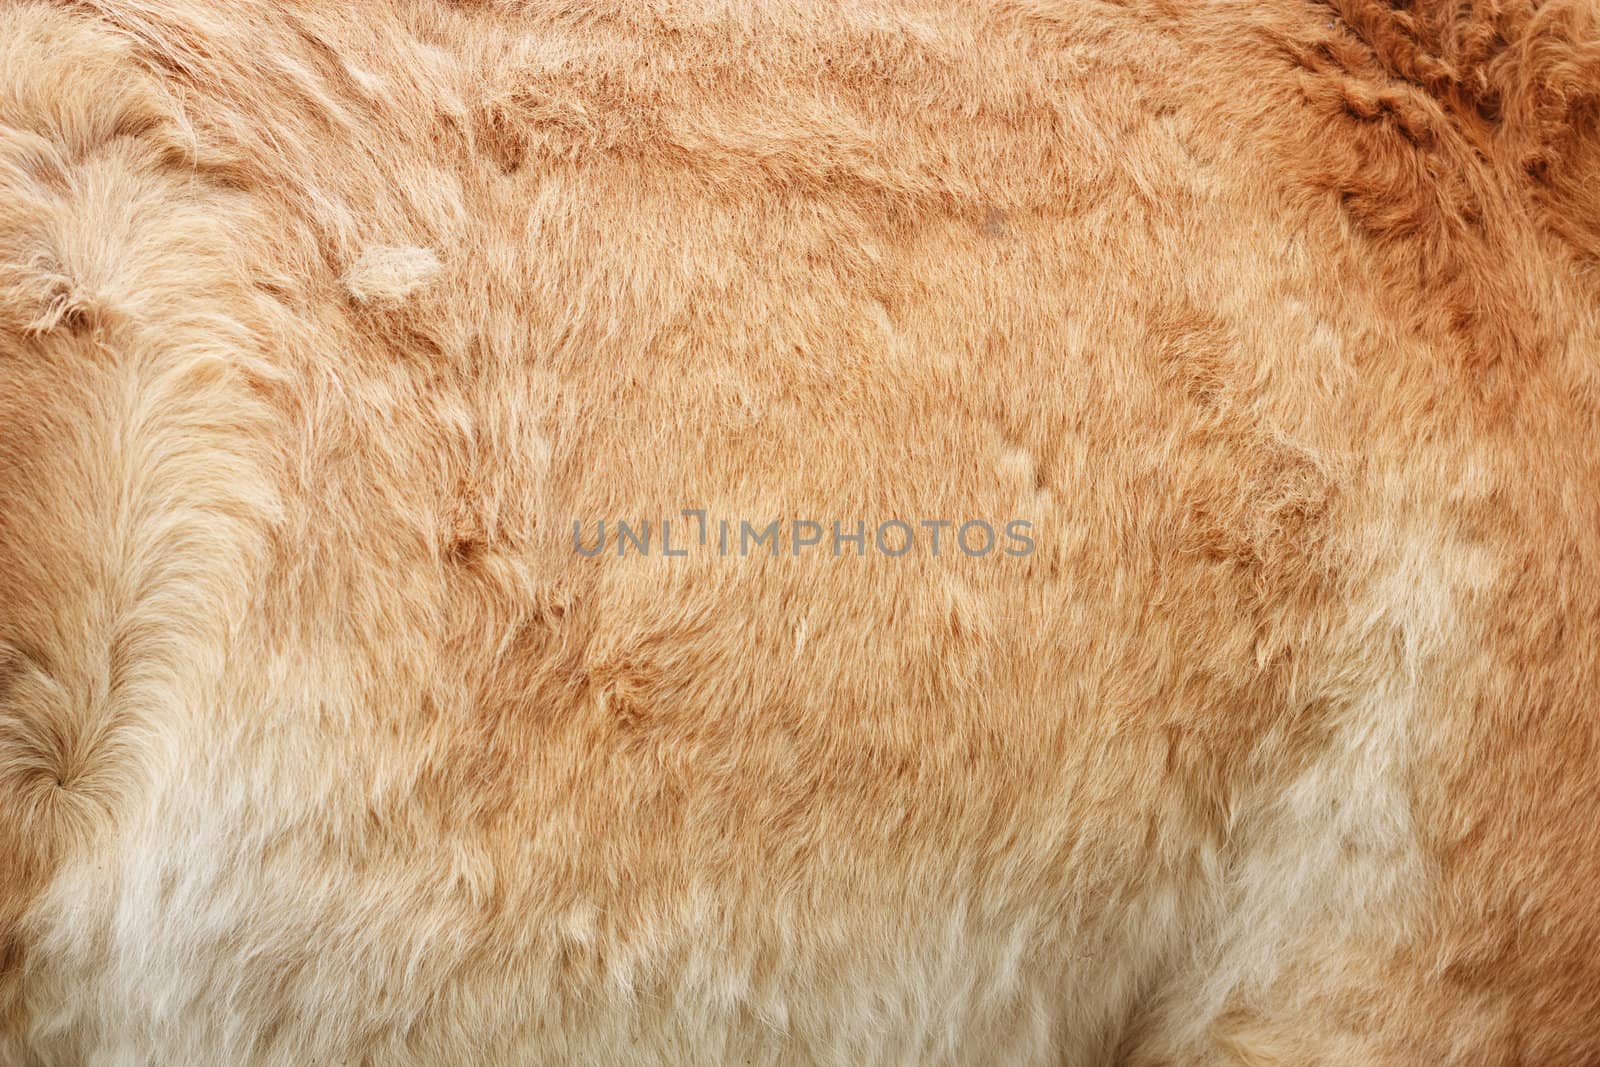 Furry skin of brown horse abstract background